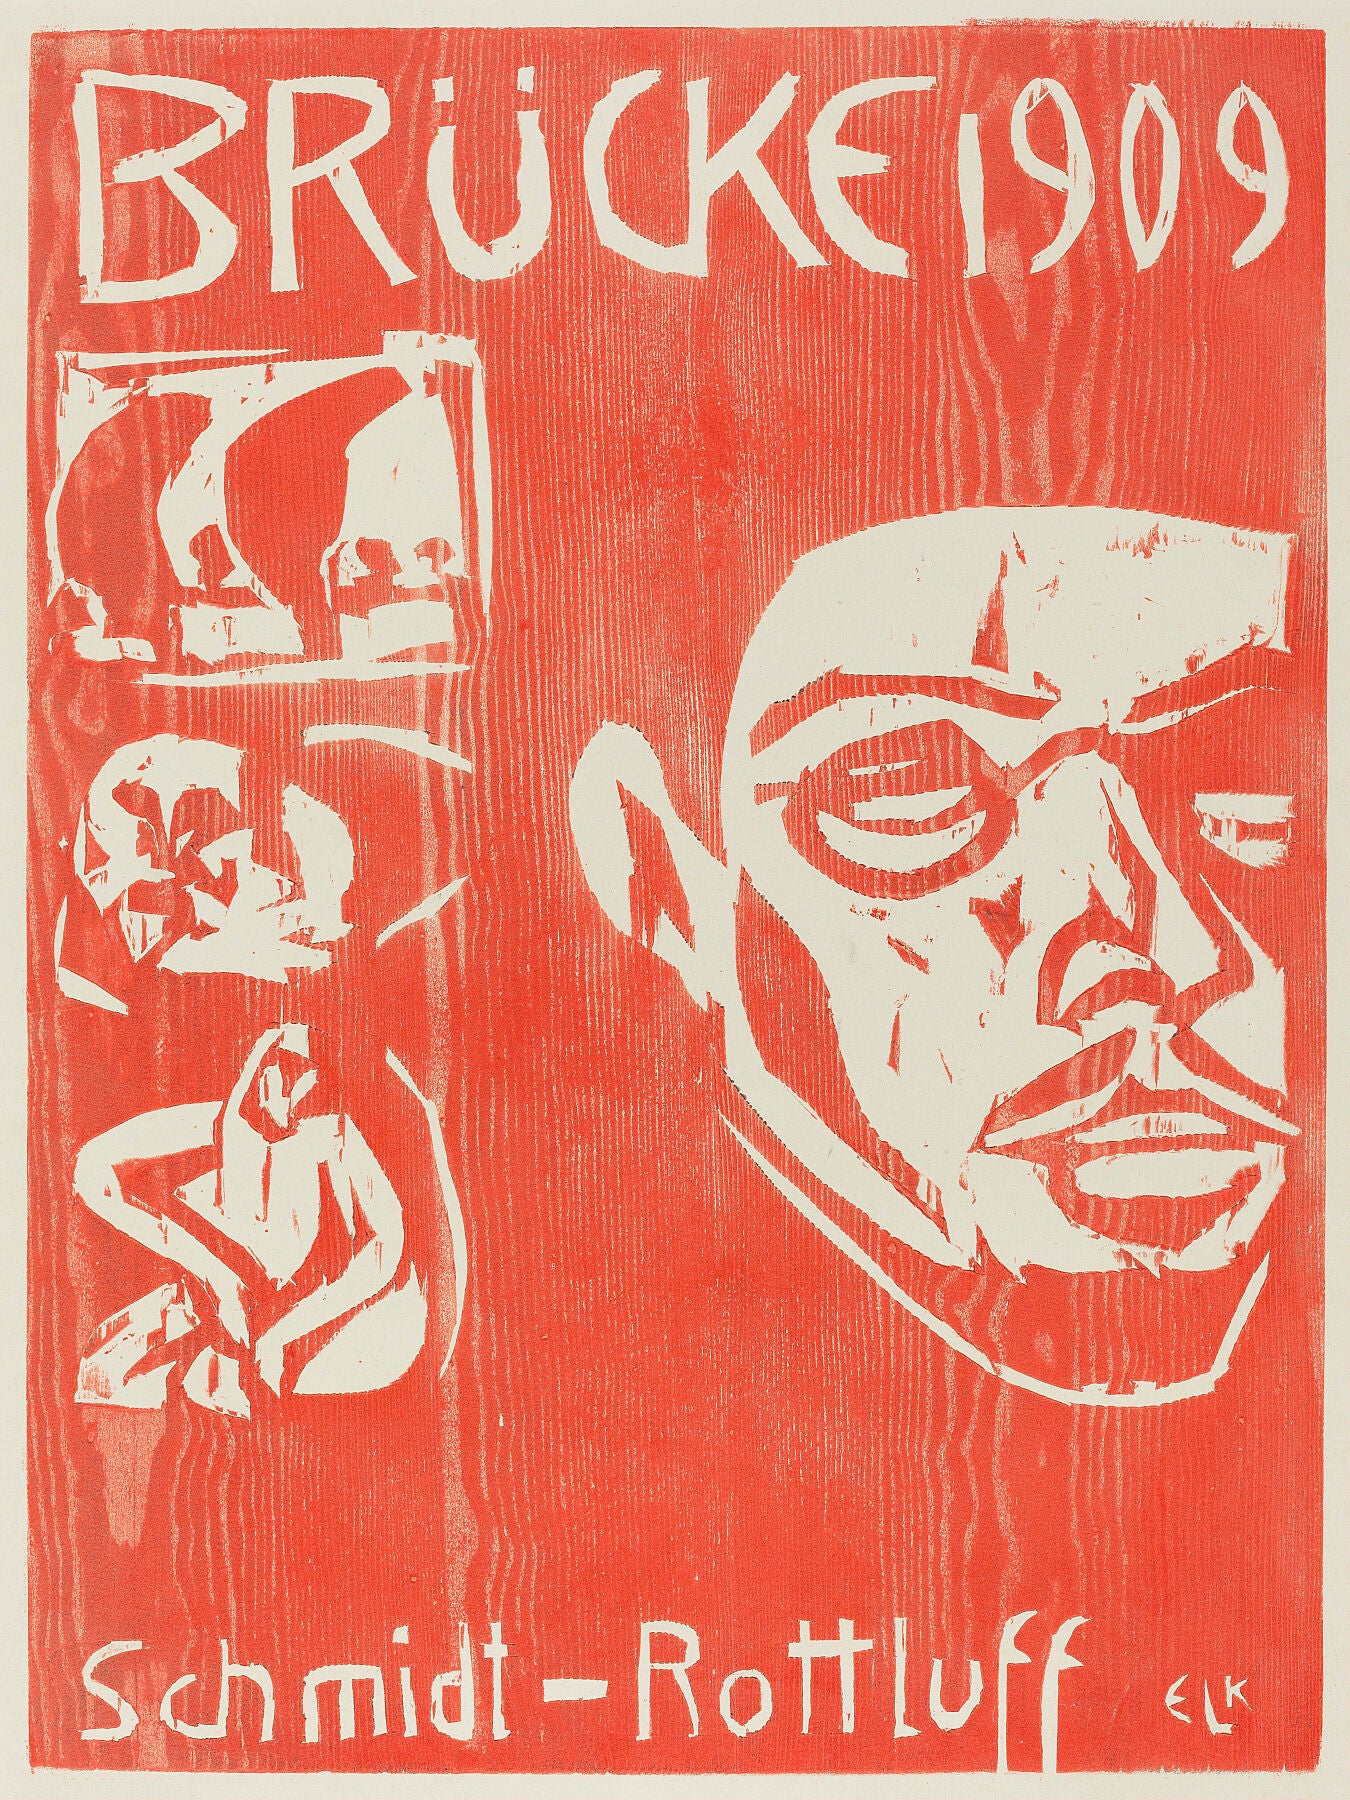 Cover of the Fourth Yearbook of the Artist Group the Brucke by Ernst Ludwig Kirchner - 1909